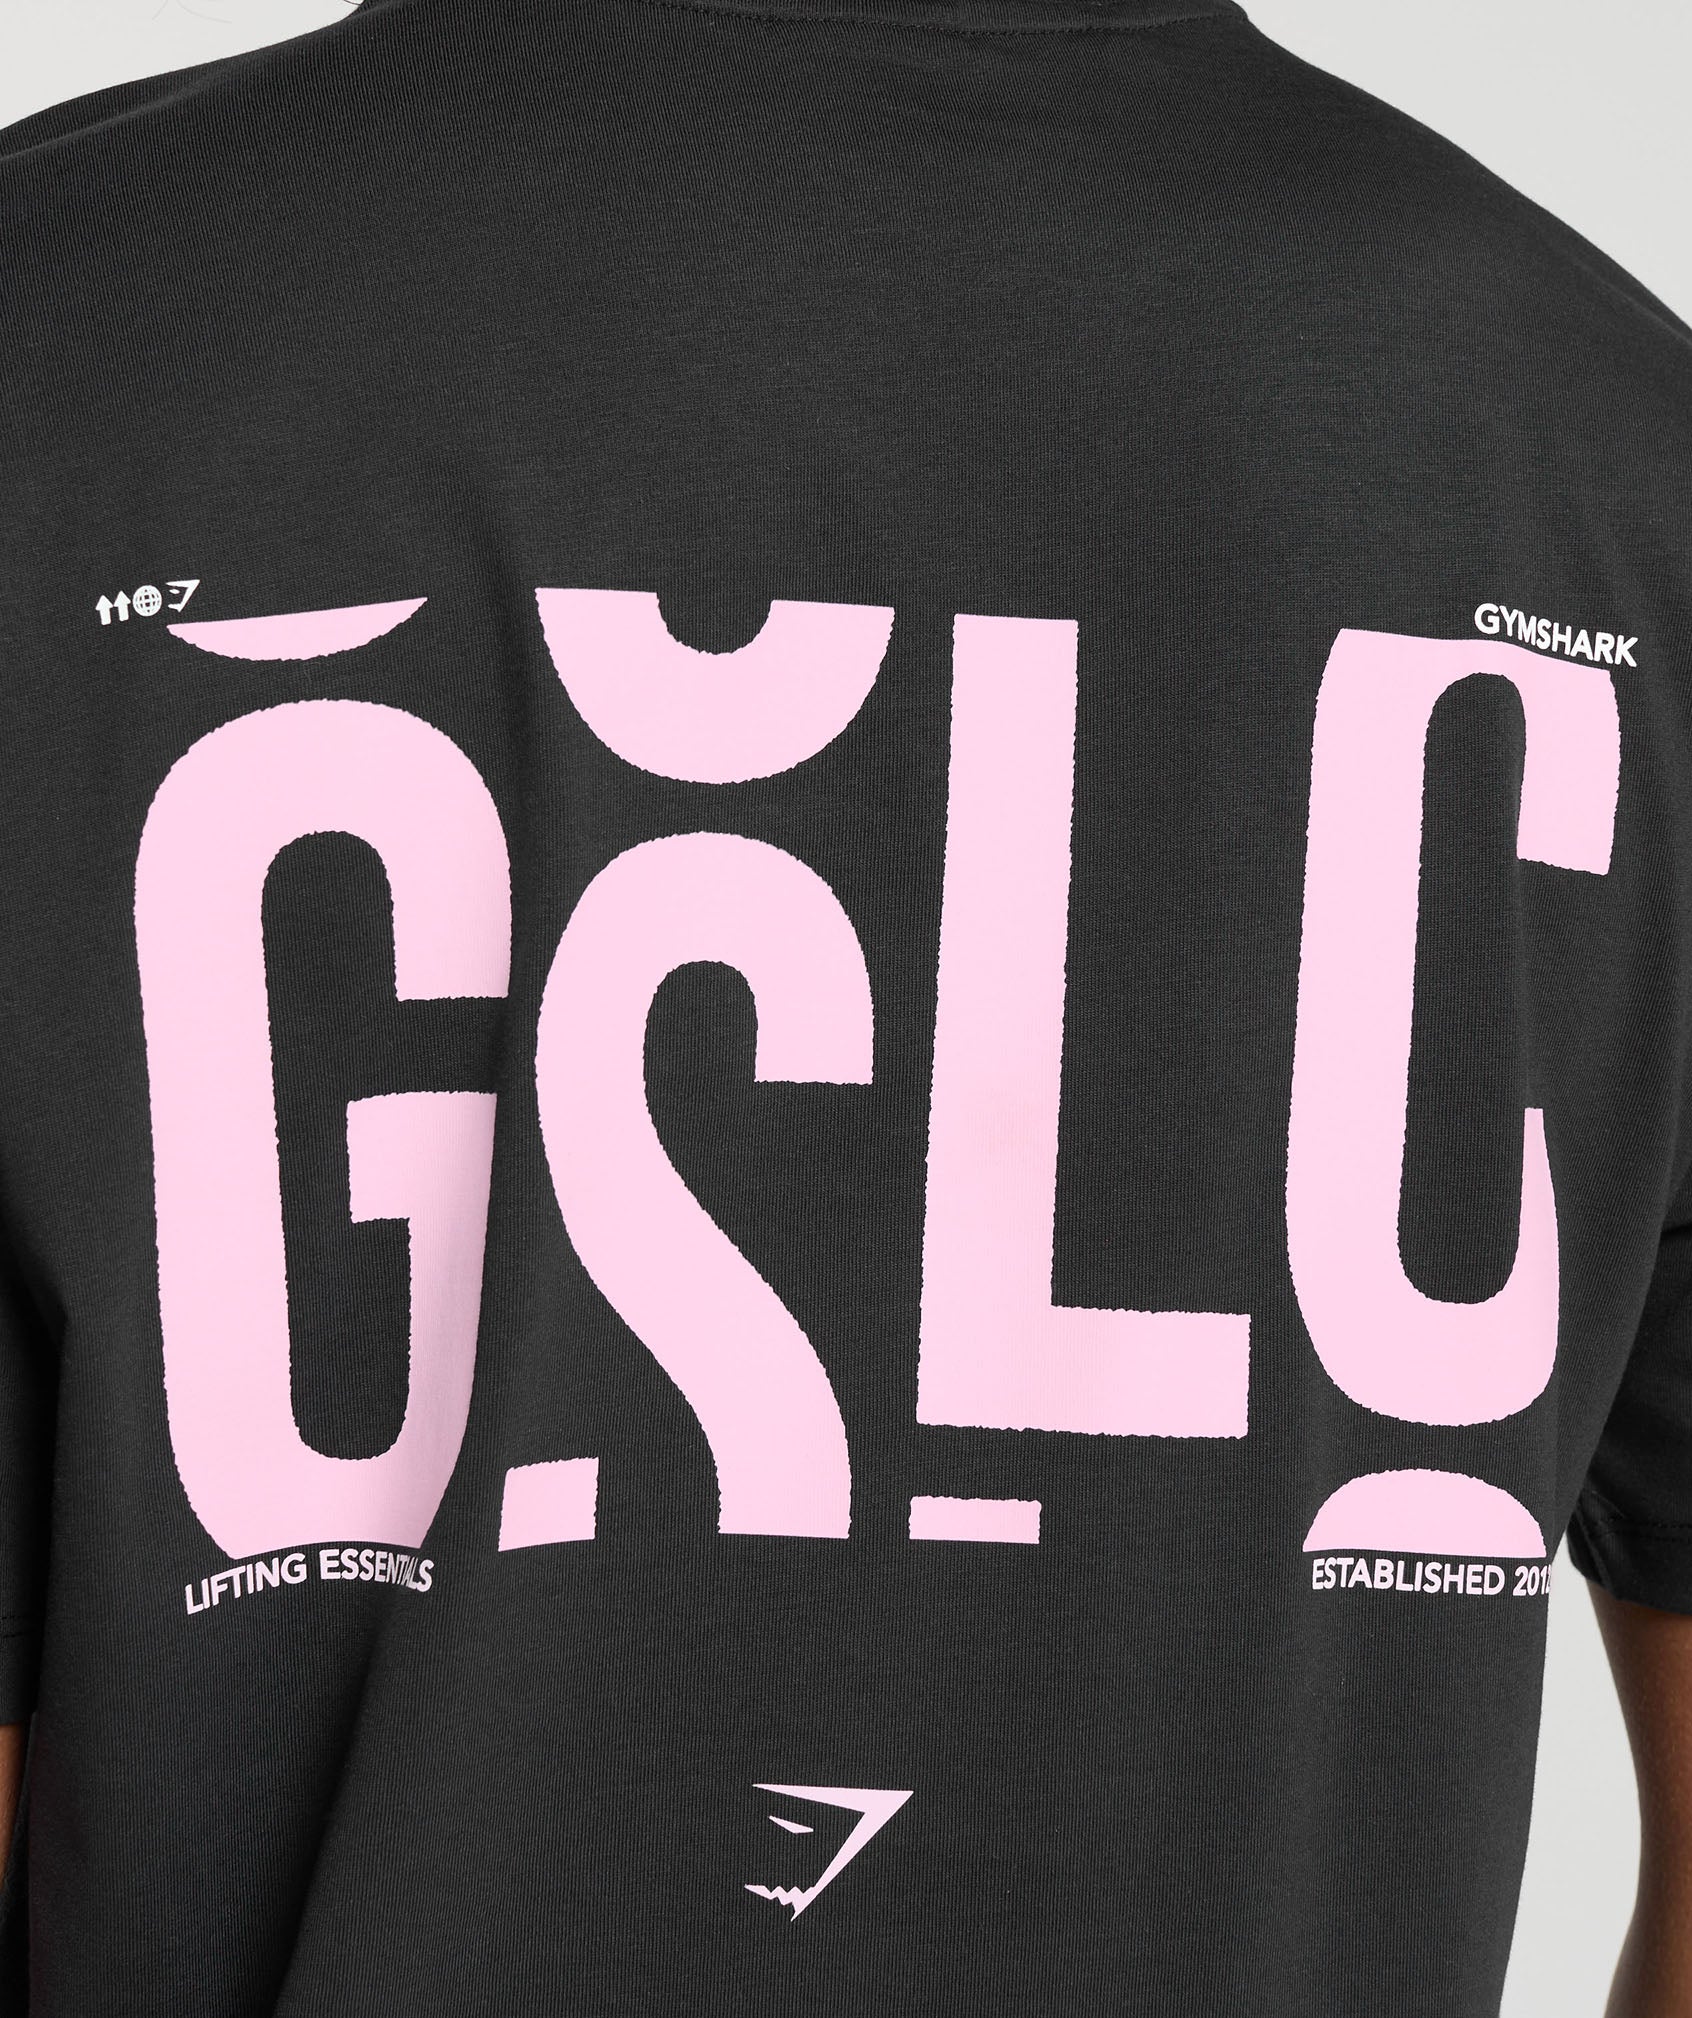 GSLC OS Tee in Black - view 5